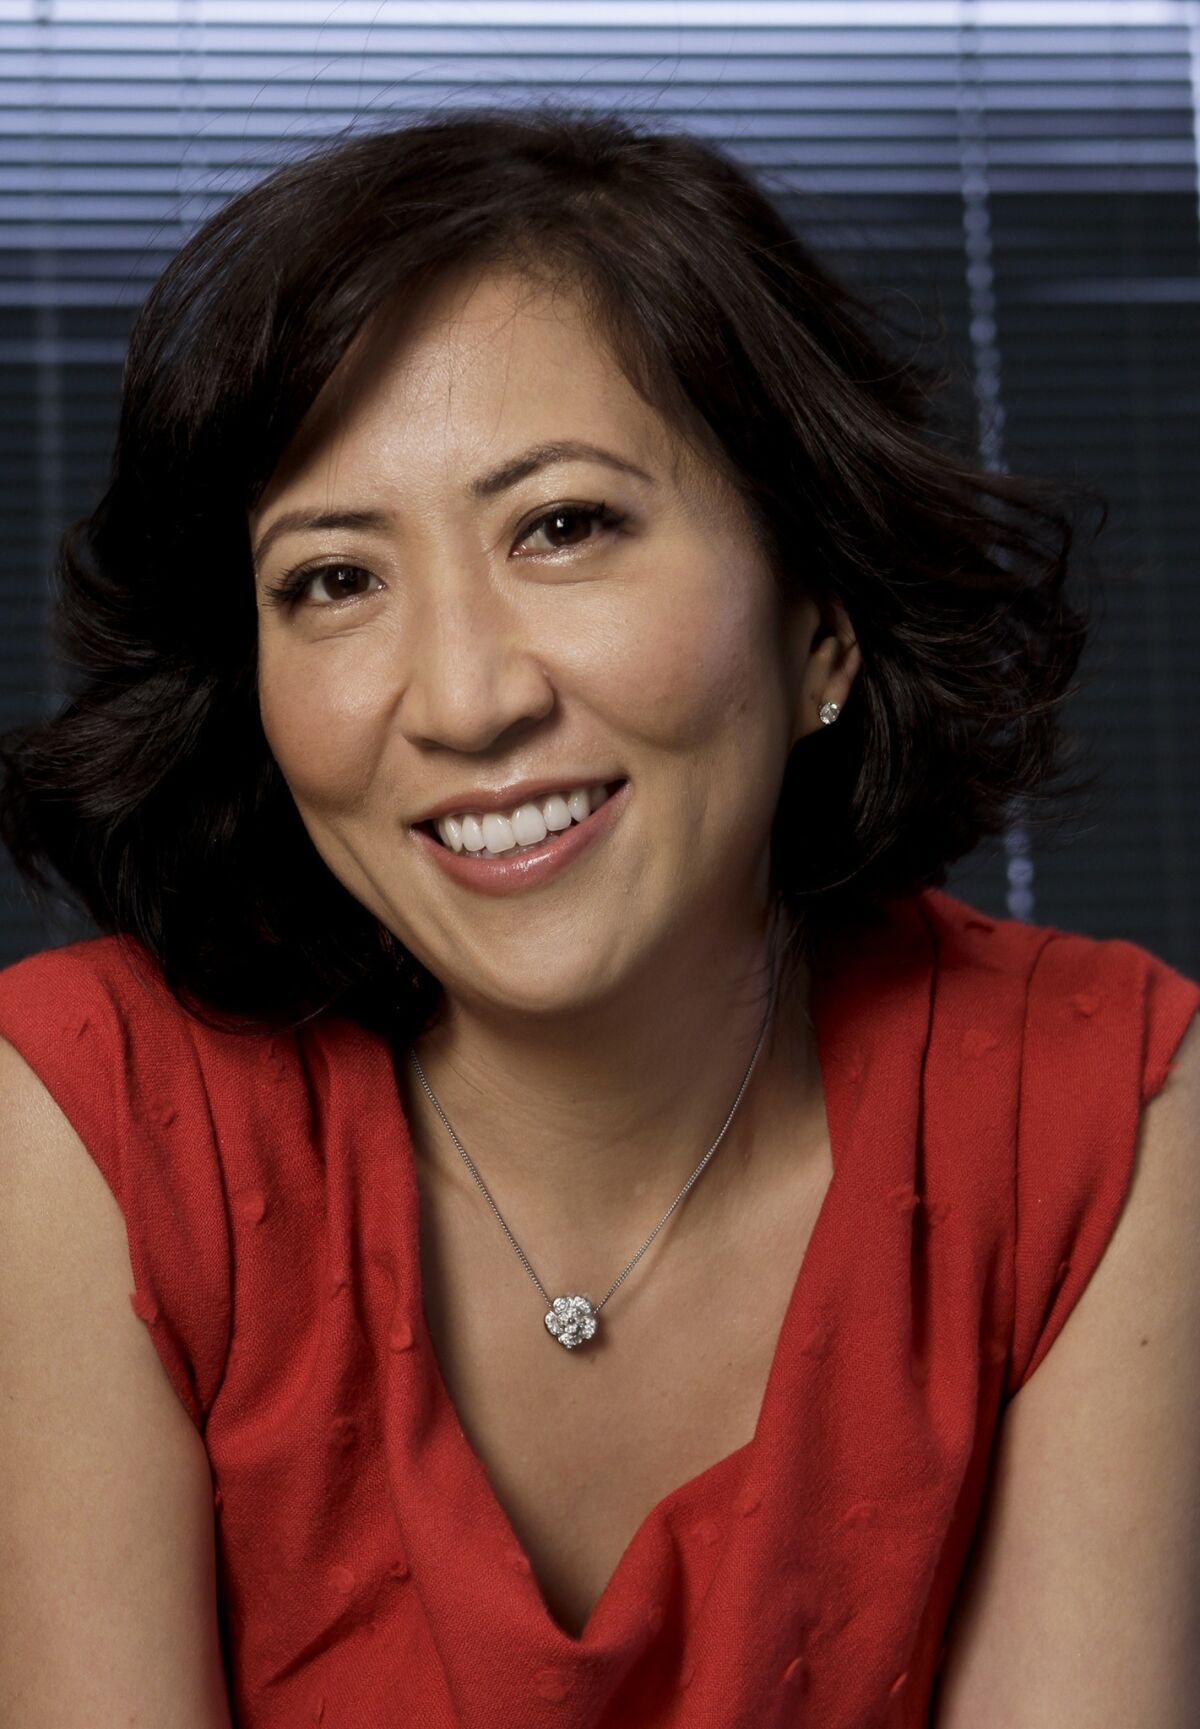 Hollywood Reporter editor Janice Min will take over as head of Billboard and the Reporter in her new position as co-president and chief creative officer of Guggenheim Media's Entertainment Group.